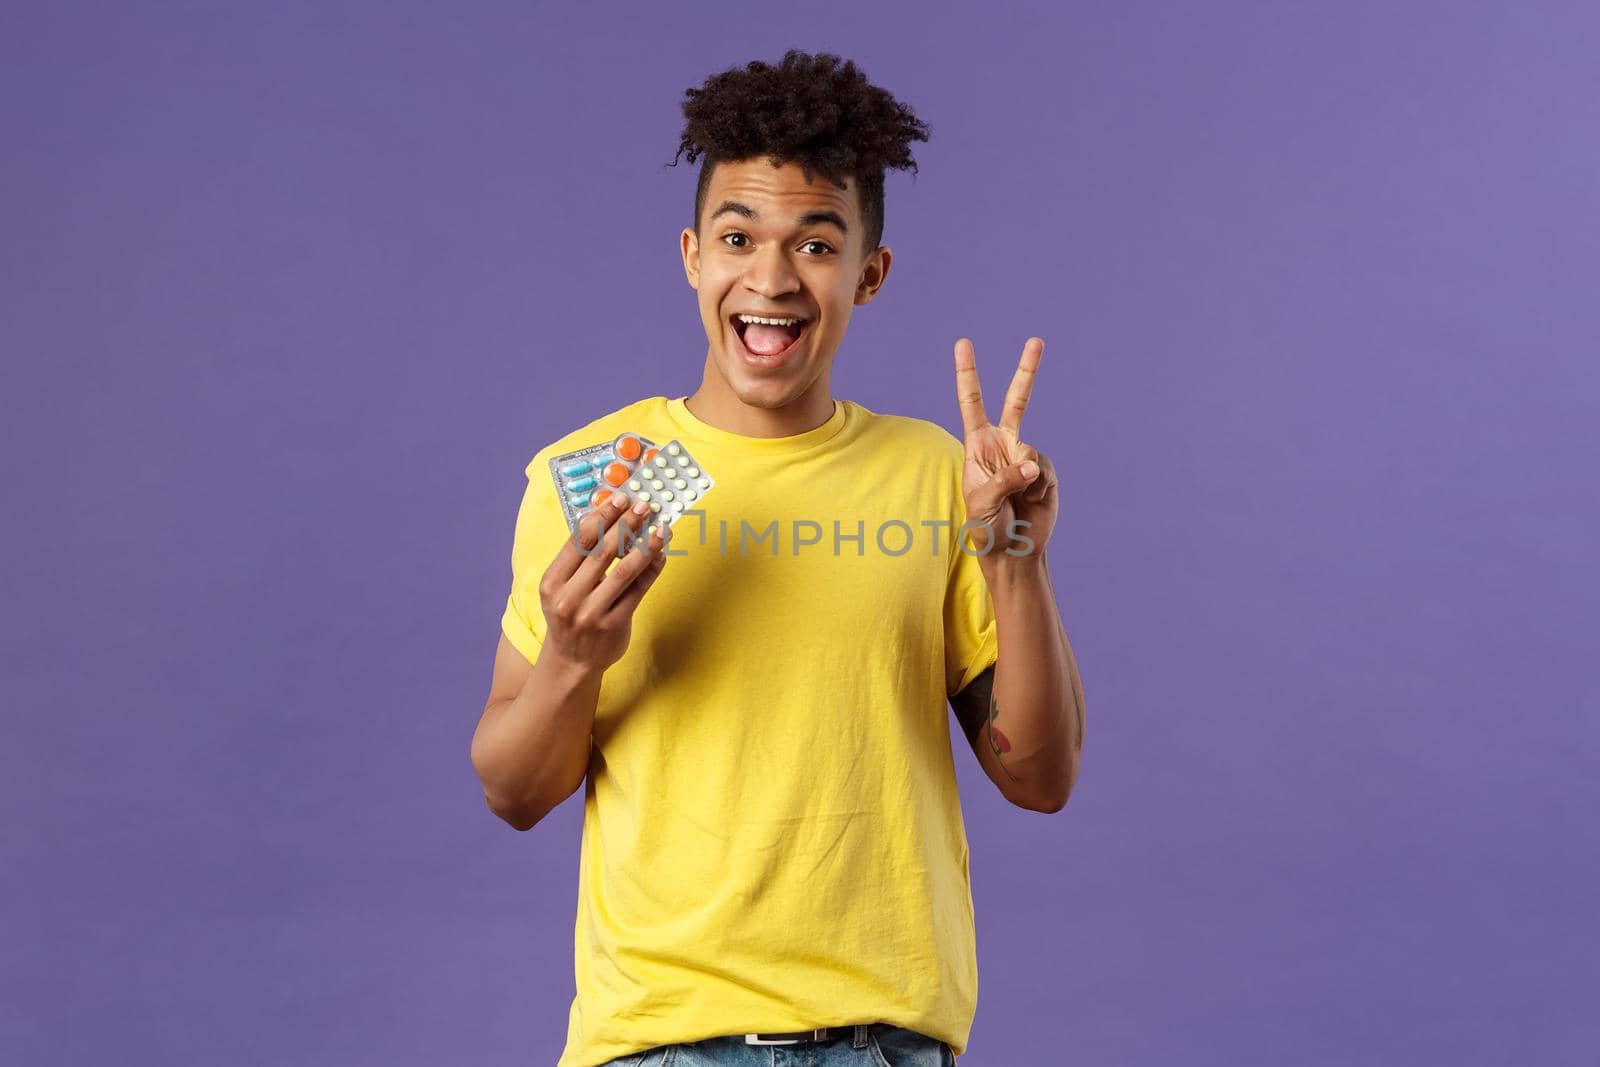 Health, influenza, covid-19 concept. Portrait of upbeat, healthy young man feel much better after taking vitamins or tablets, hold prescribed drugs, show peace sign, smiling pleased.